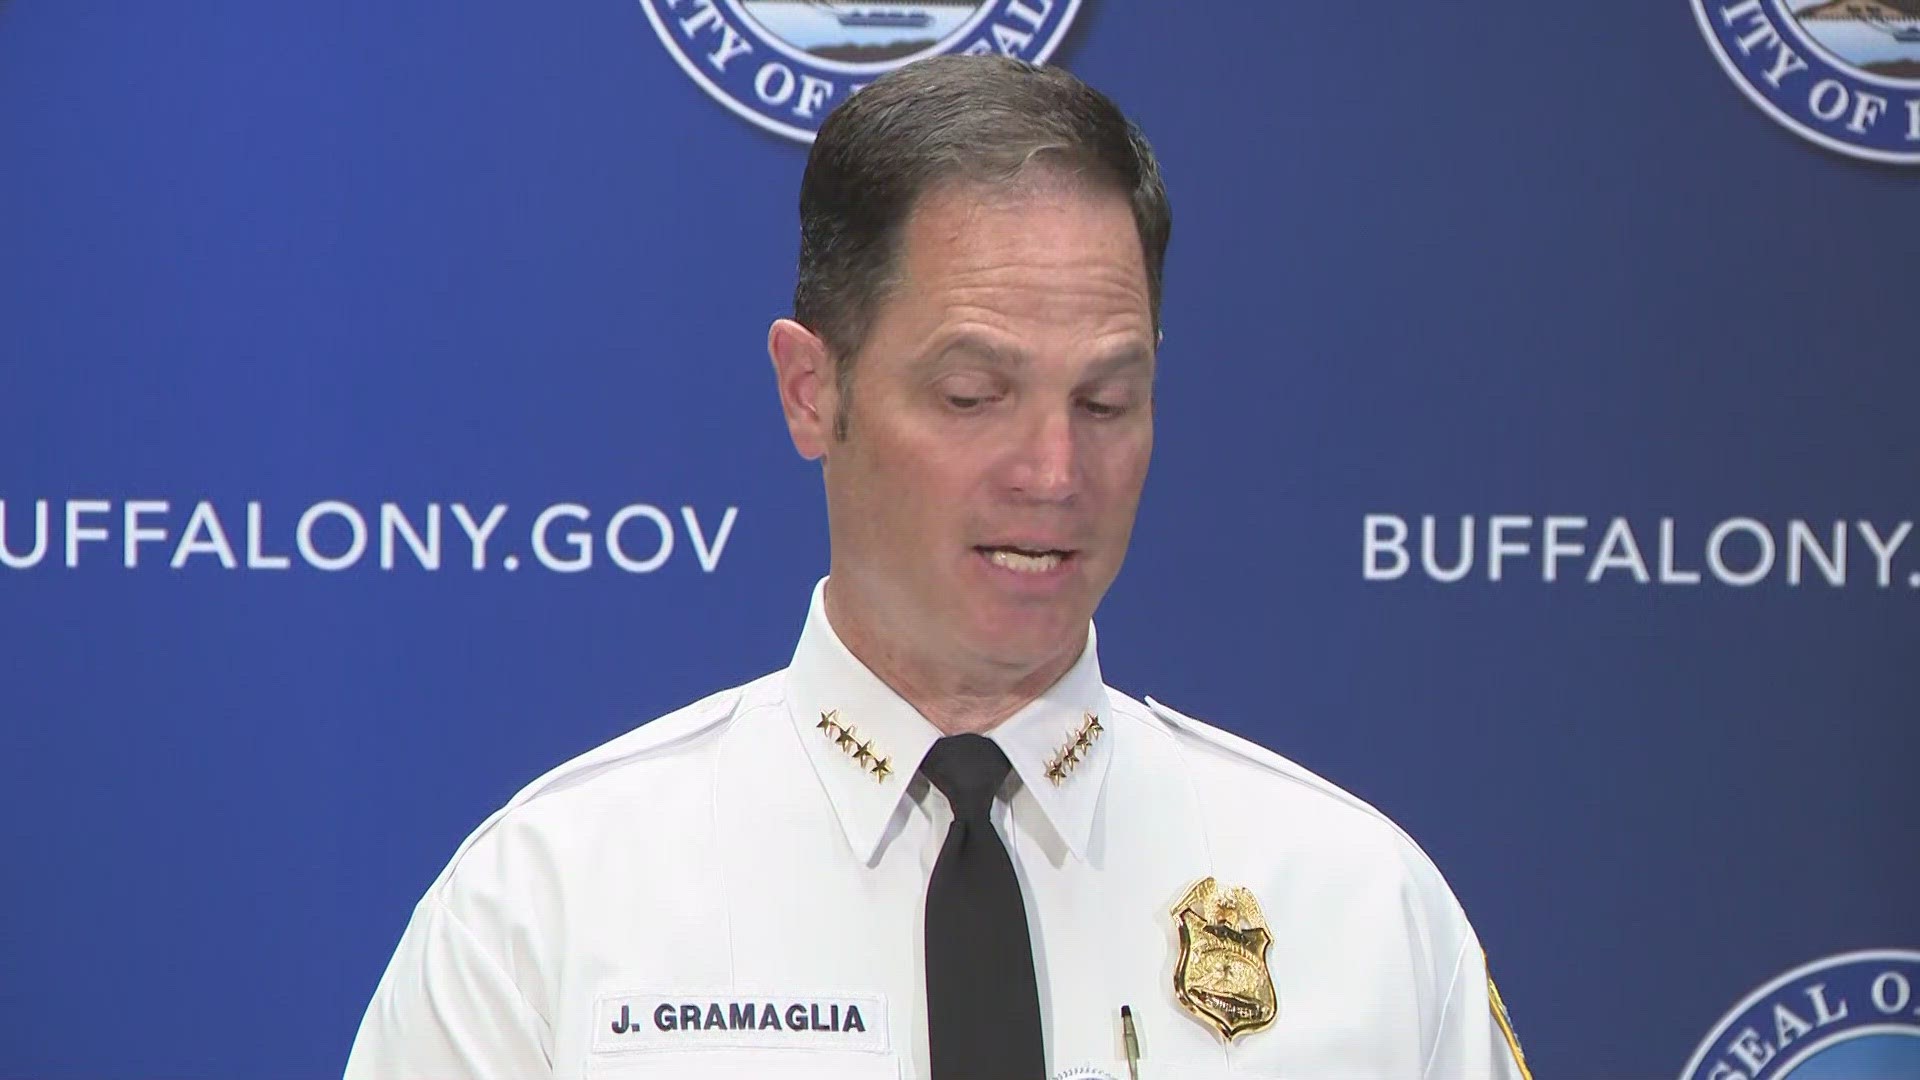 Buffalo Police Commissioner Joseph Gramaglia provides update on missing children and explains why no AMBER Alert has been issued.